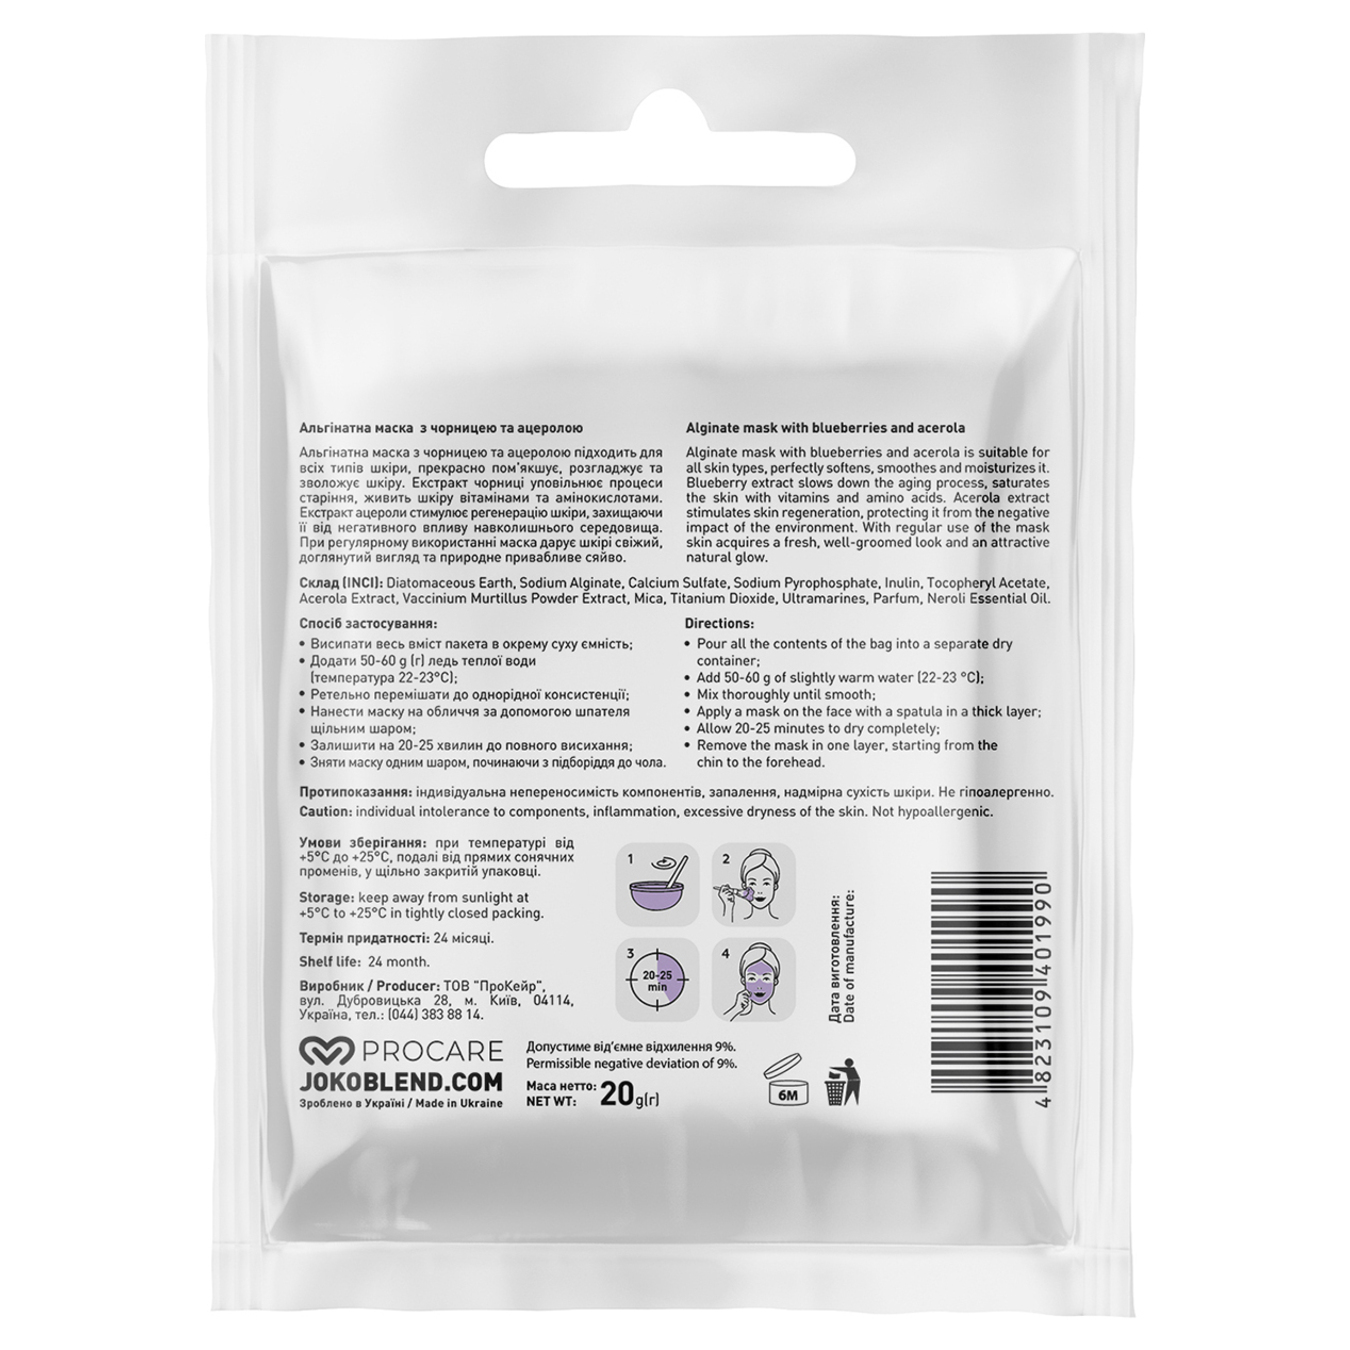 Alginate face mask "Joko Blend" with blueberries and acerola 20g 2